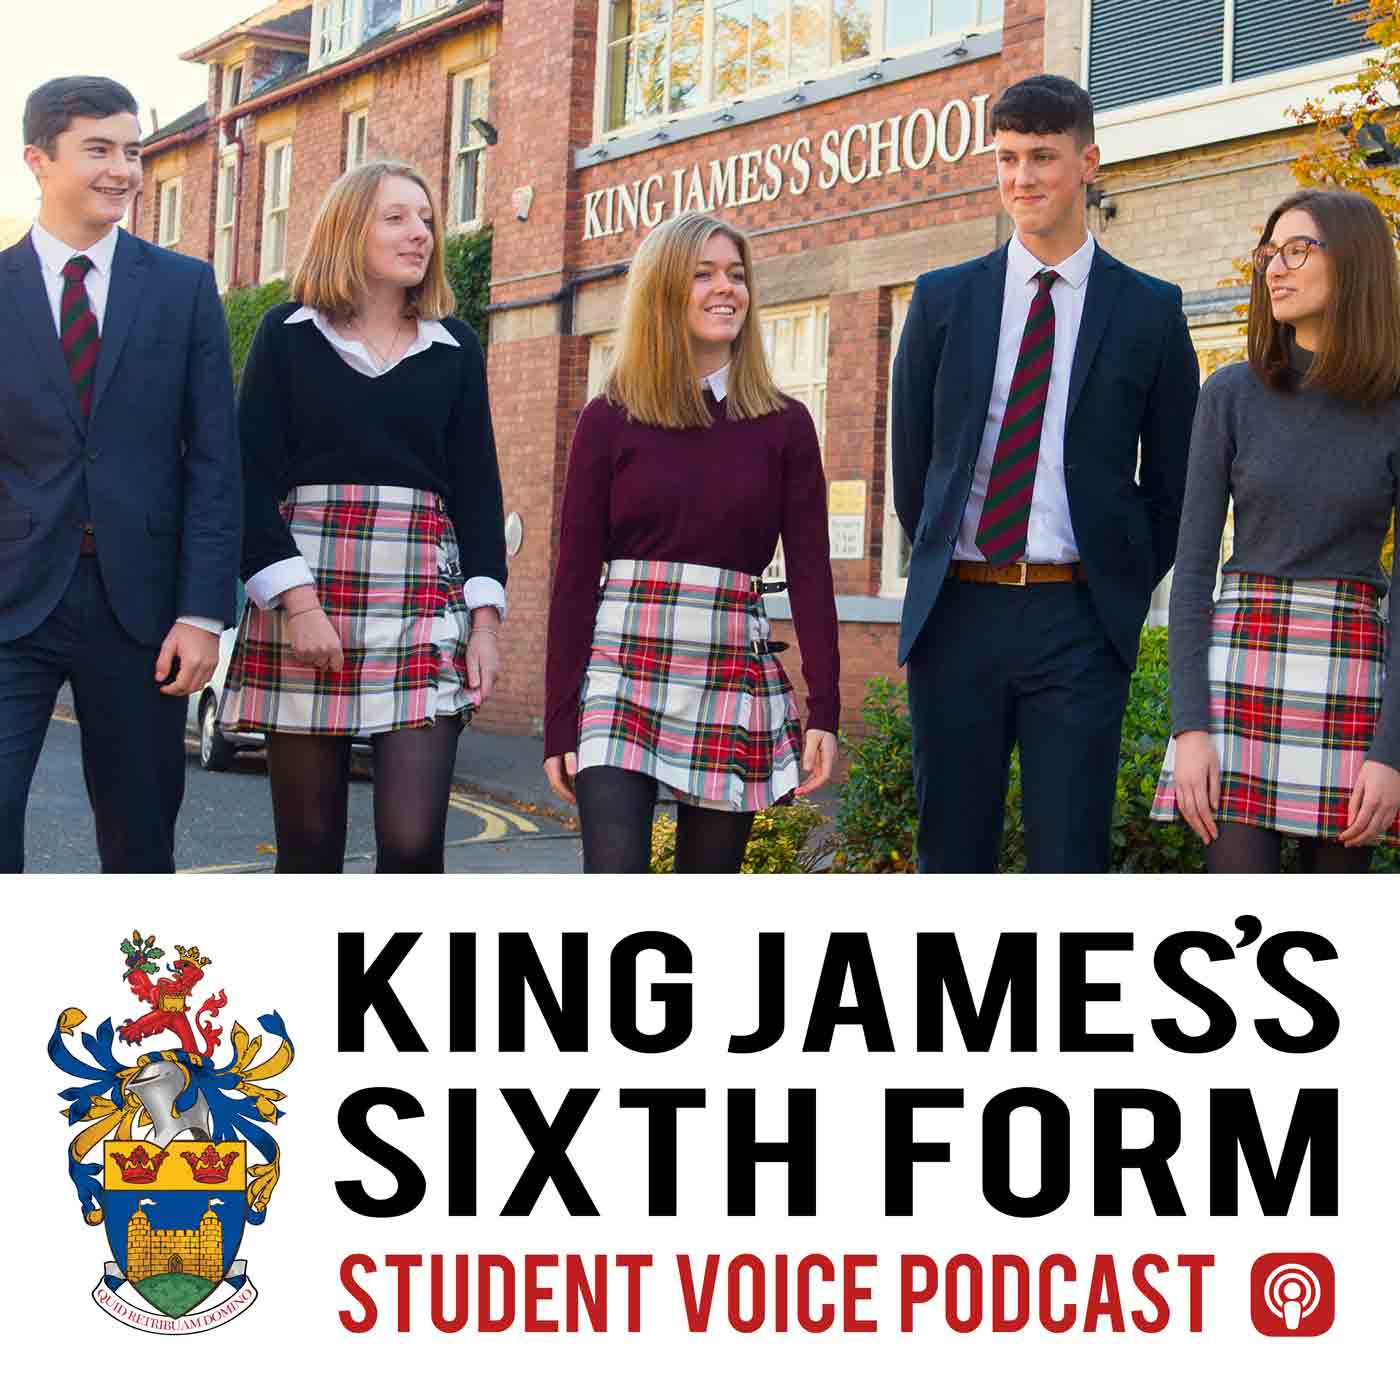 Student Voice - King James's Sixth Form